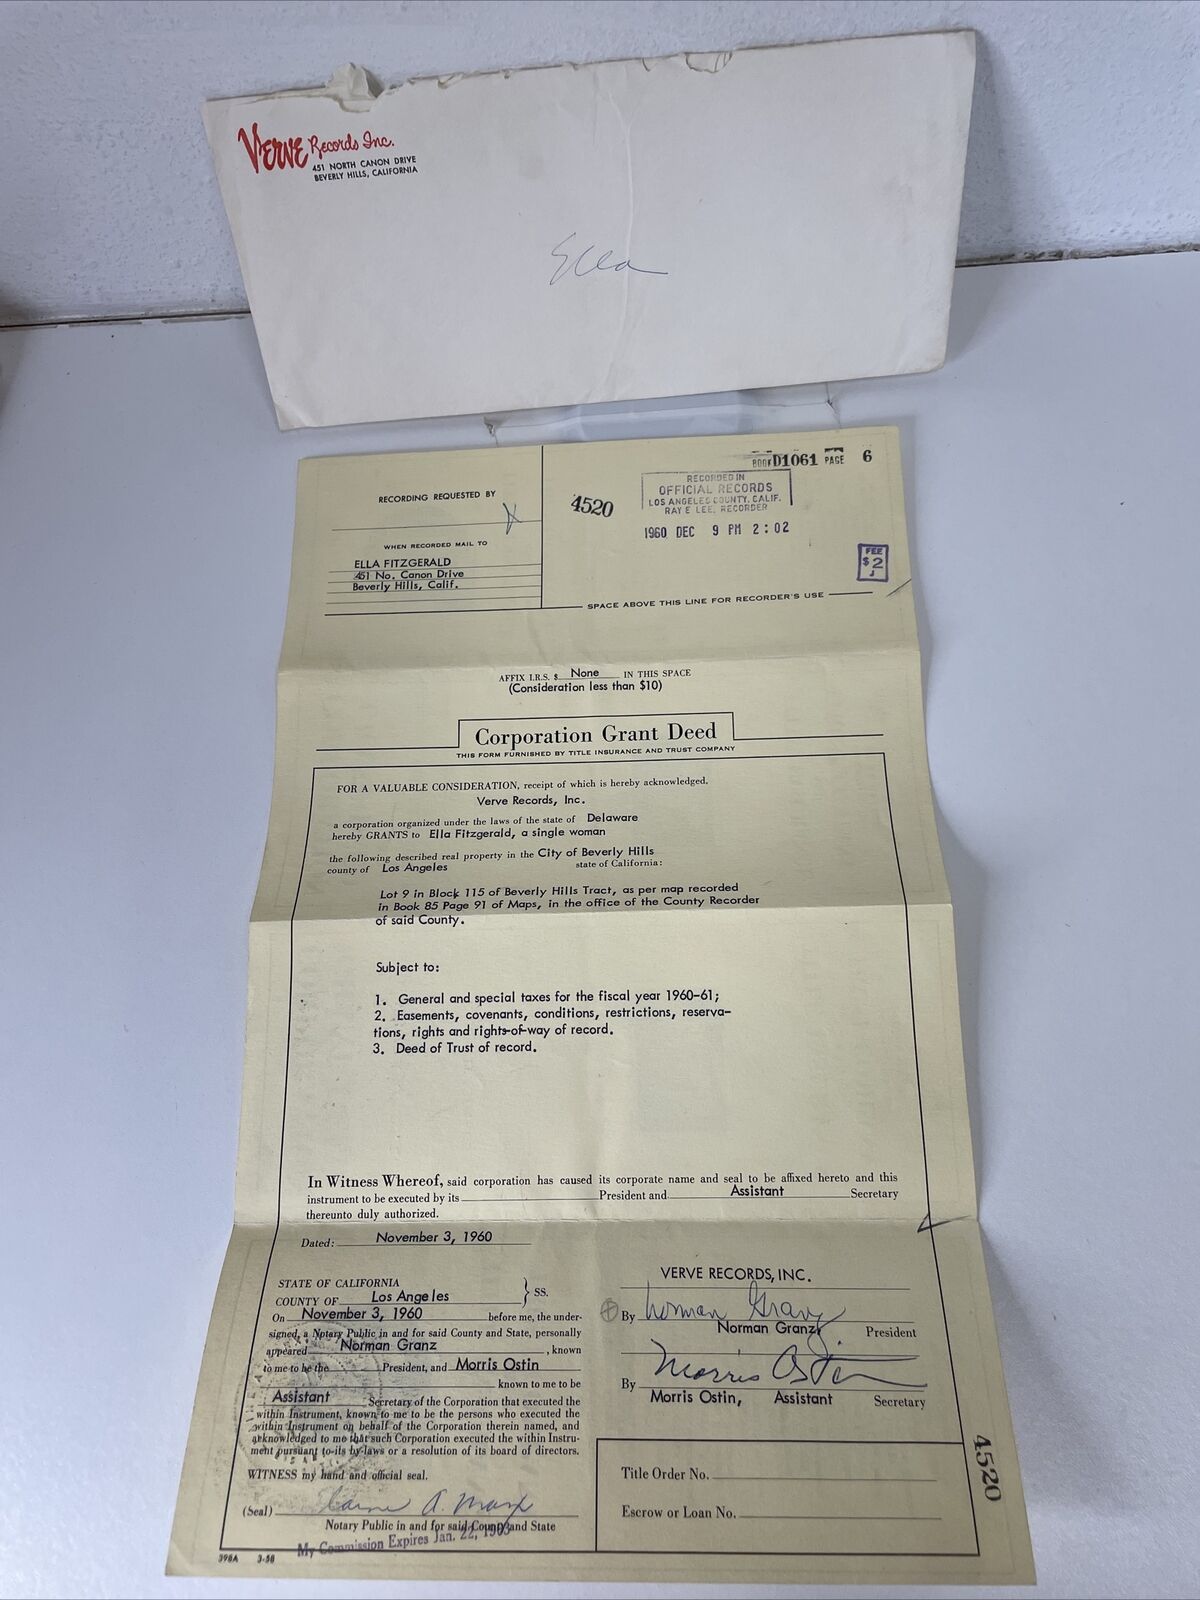 ELLA FITZGERALD (QUEEN OF JAZZ) CORPORATION GRANT DEED FROM VERVE RECORDS ~ 1960